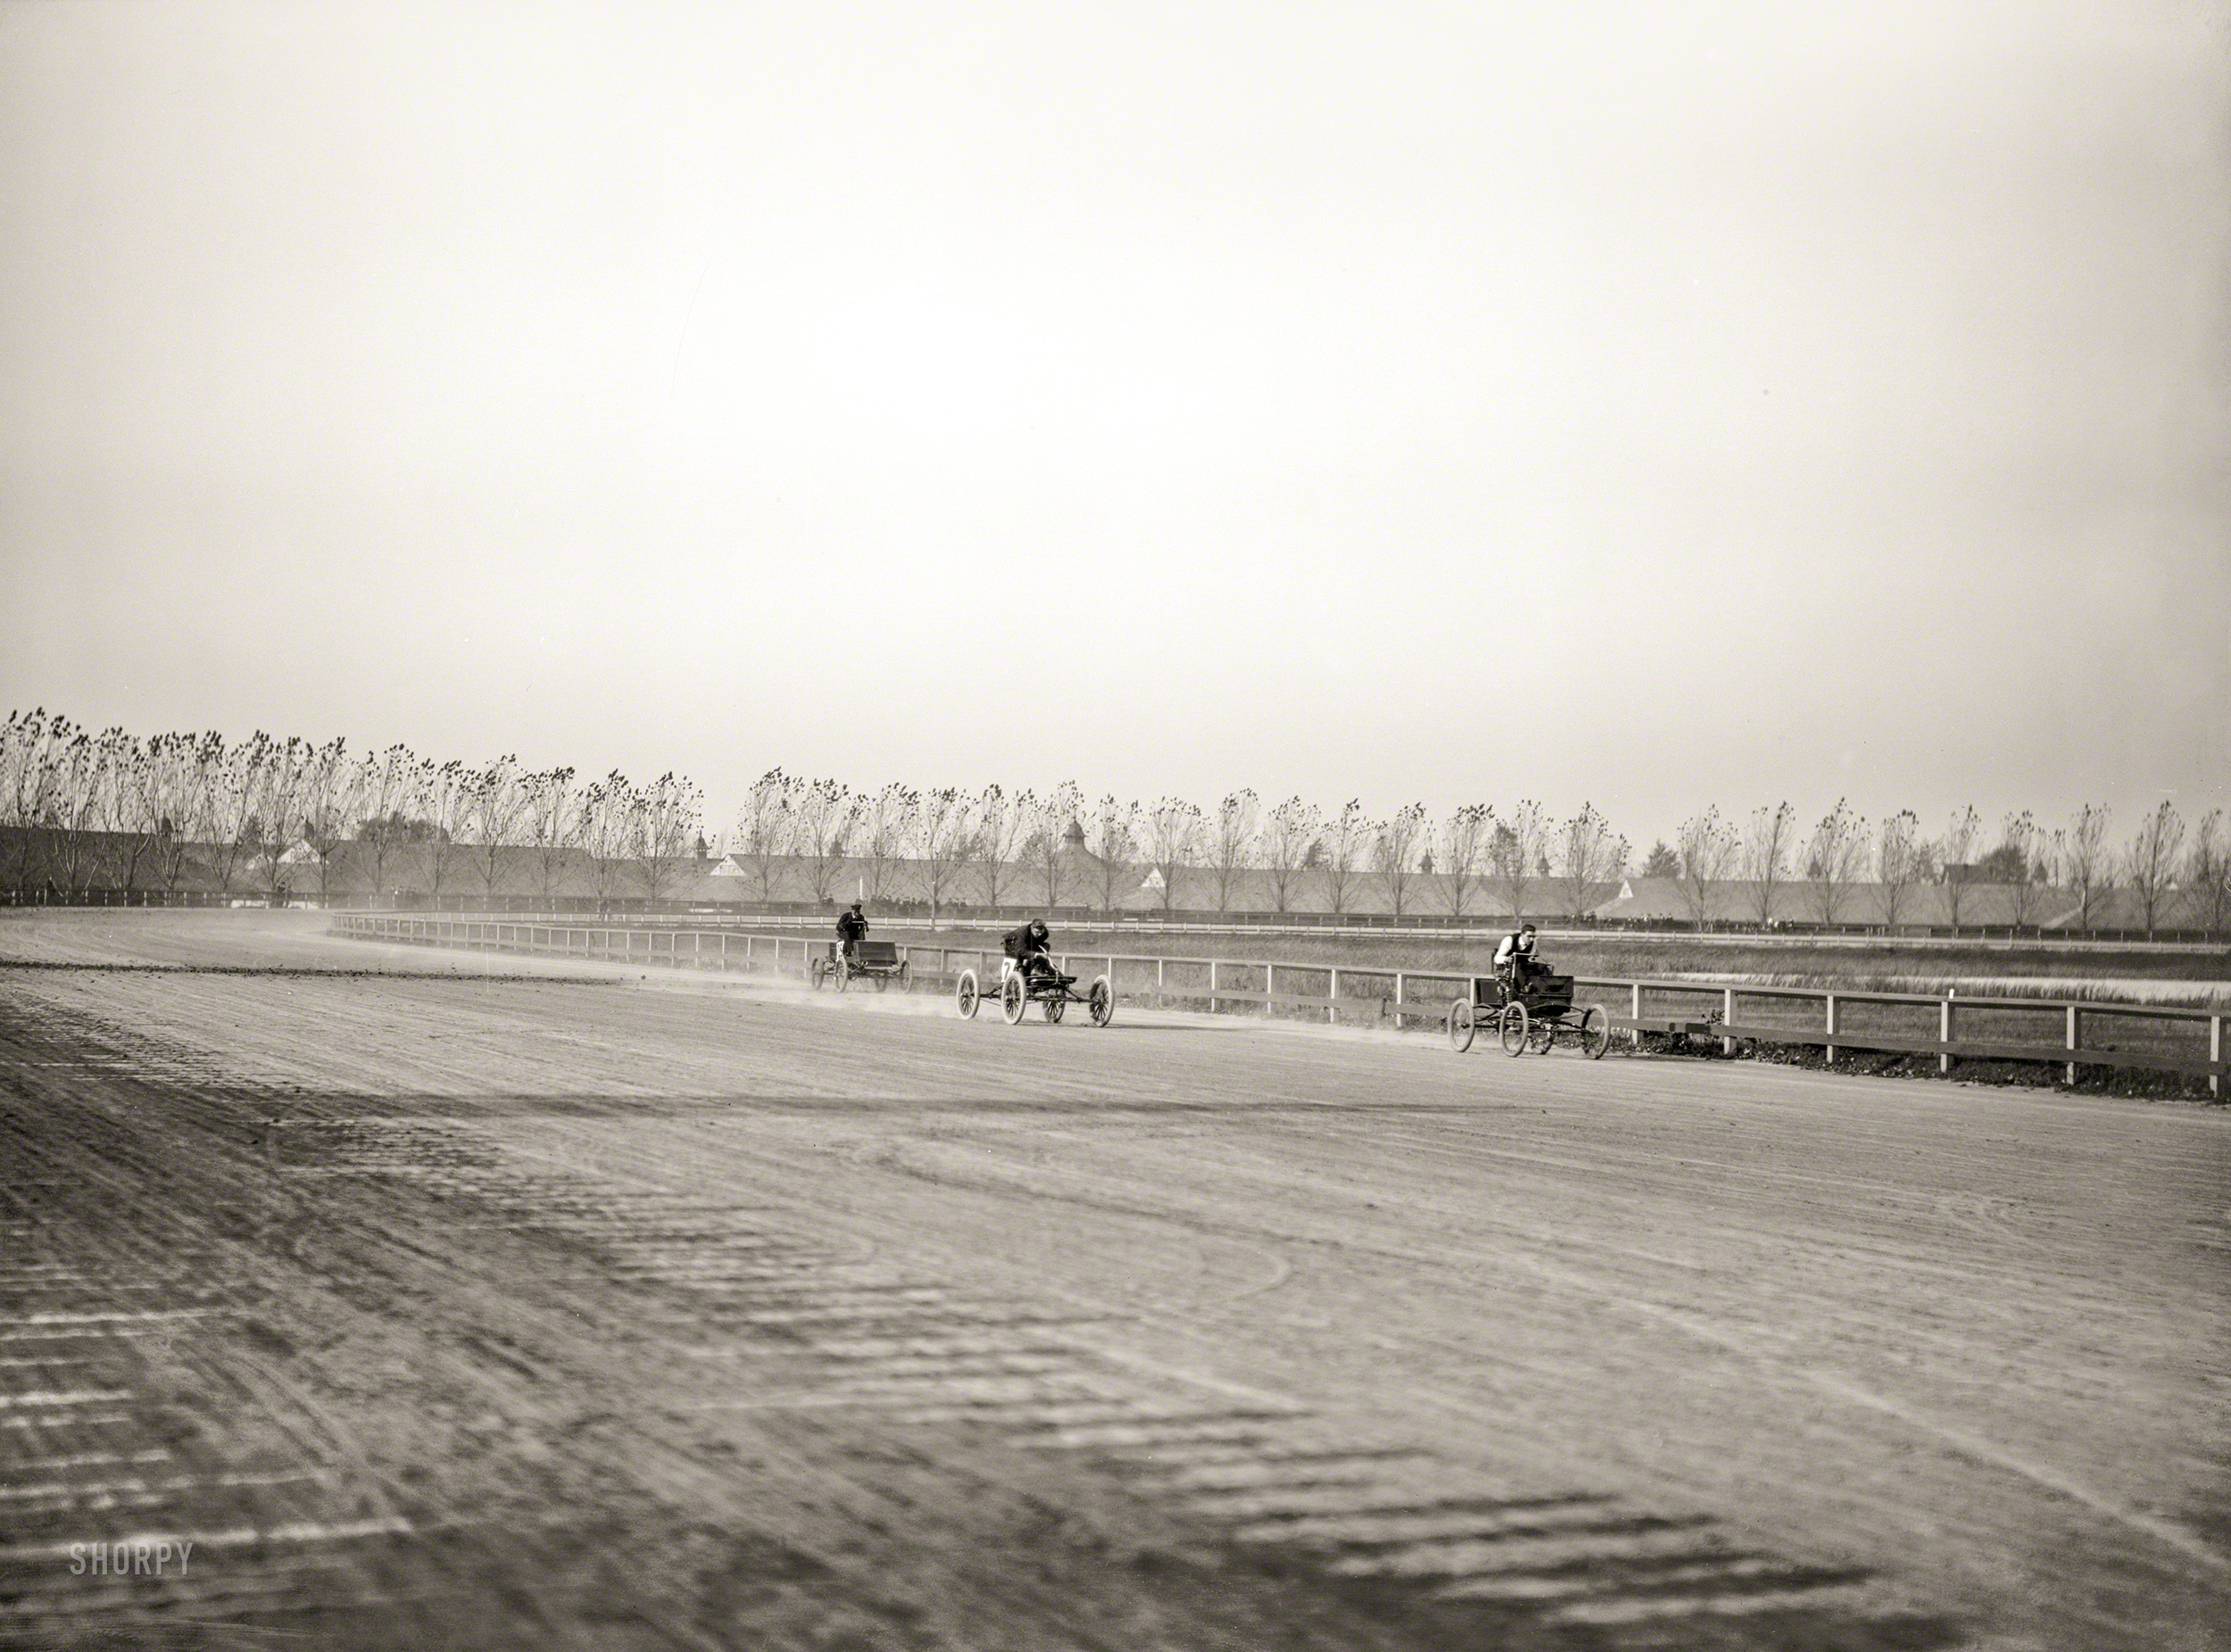 1902. "Reimers Loco winning five-miles event in 10:51 4-5, Grosse Pointe track, Detroit." A Locomobile steamer piloted by one M.R. Reimers. View full size.